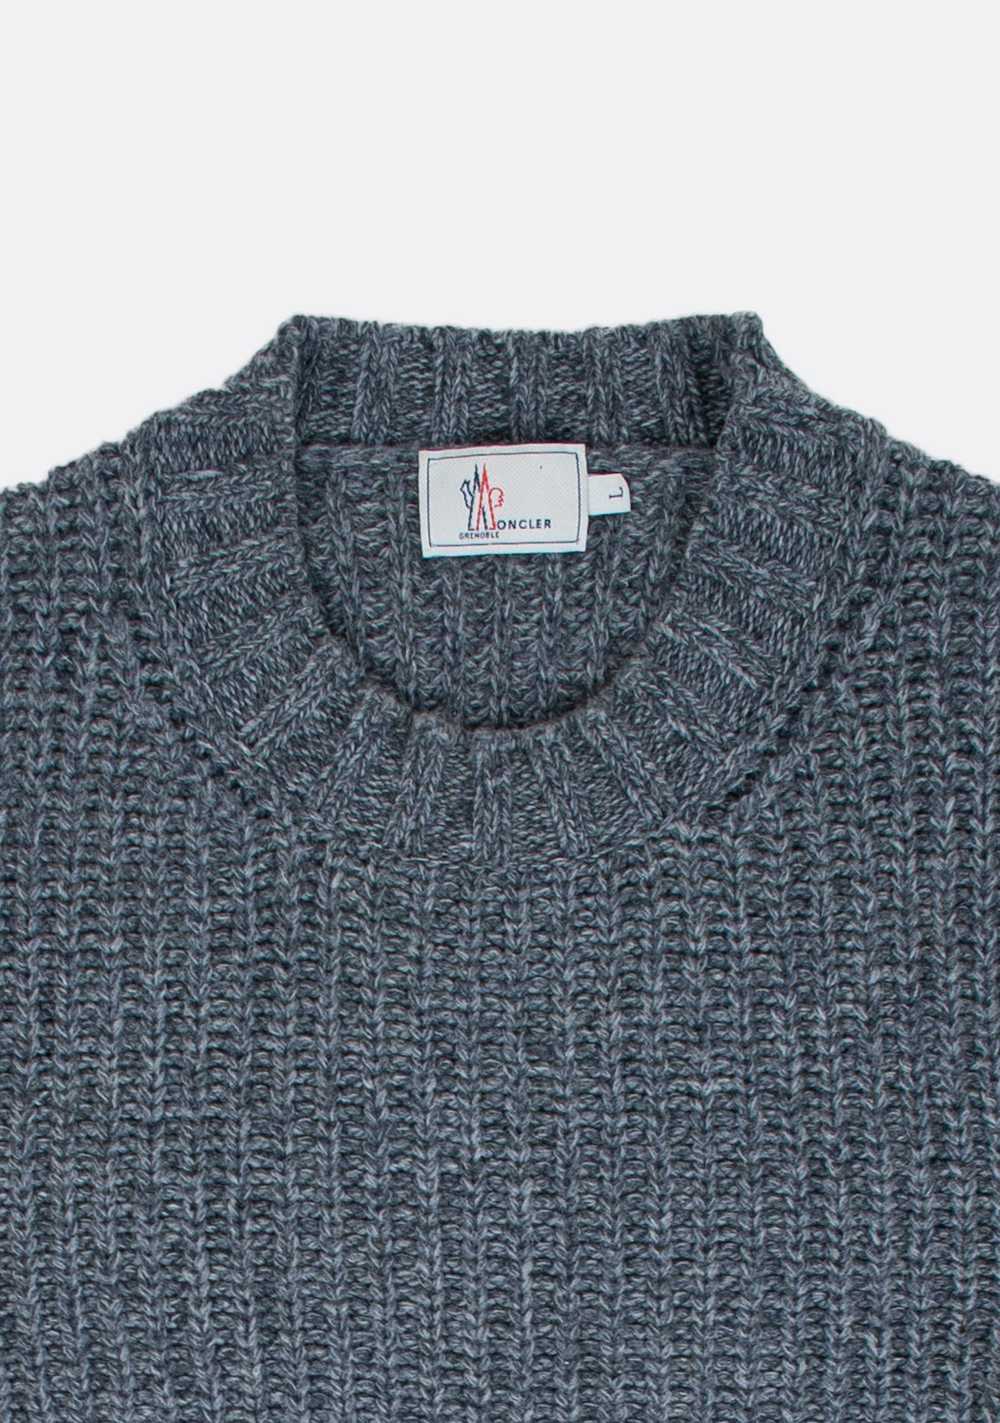 Moncler Moncler Maglione Tricot Girocollo Wool Bl… - image 3